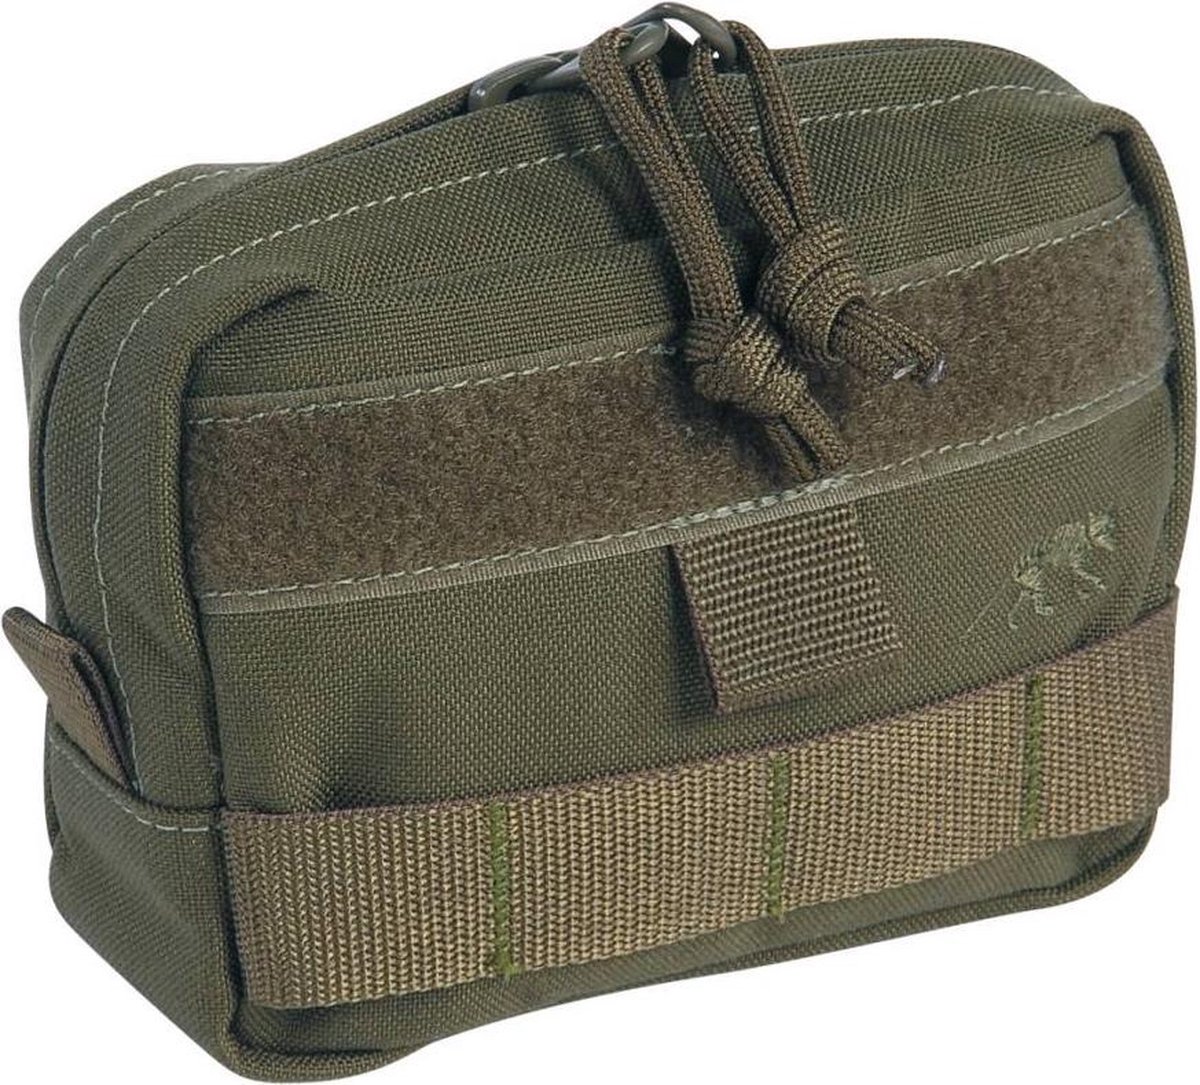 TT Tac Pouch 4 Olive